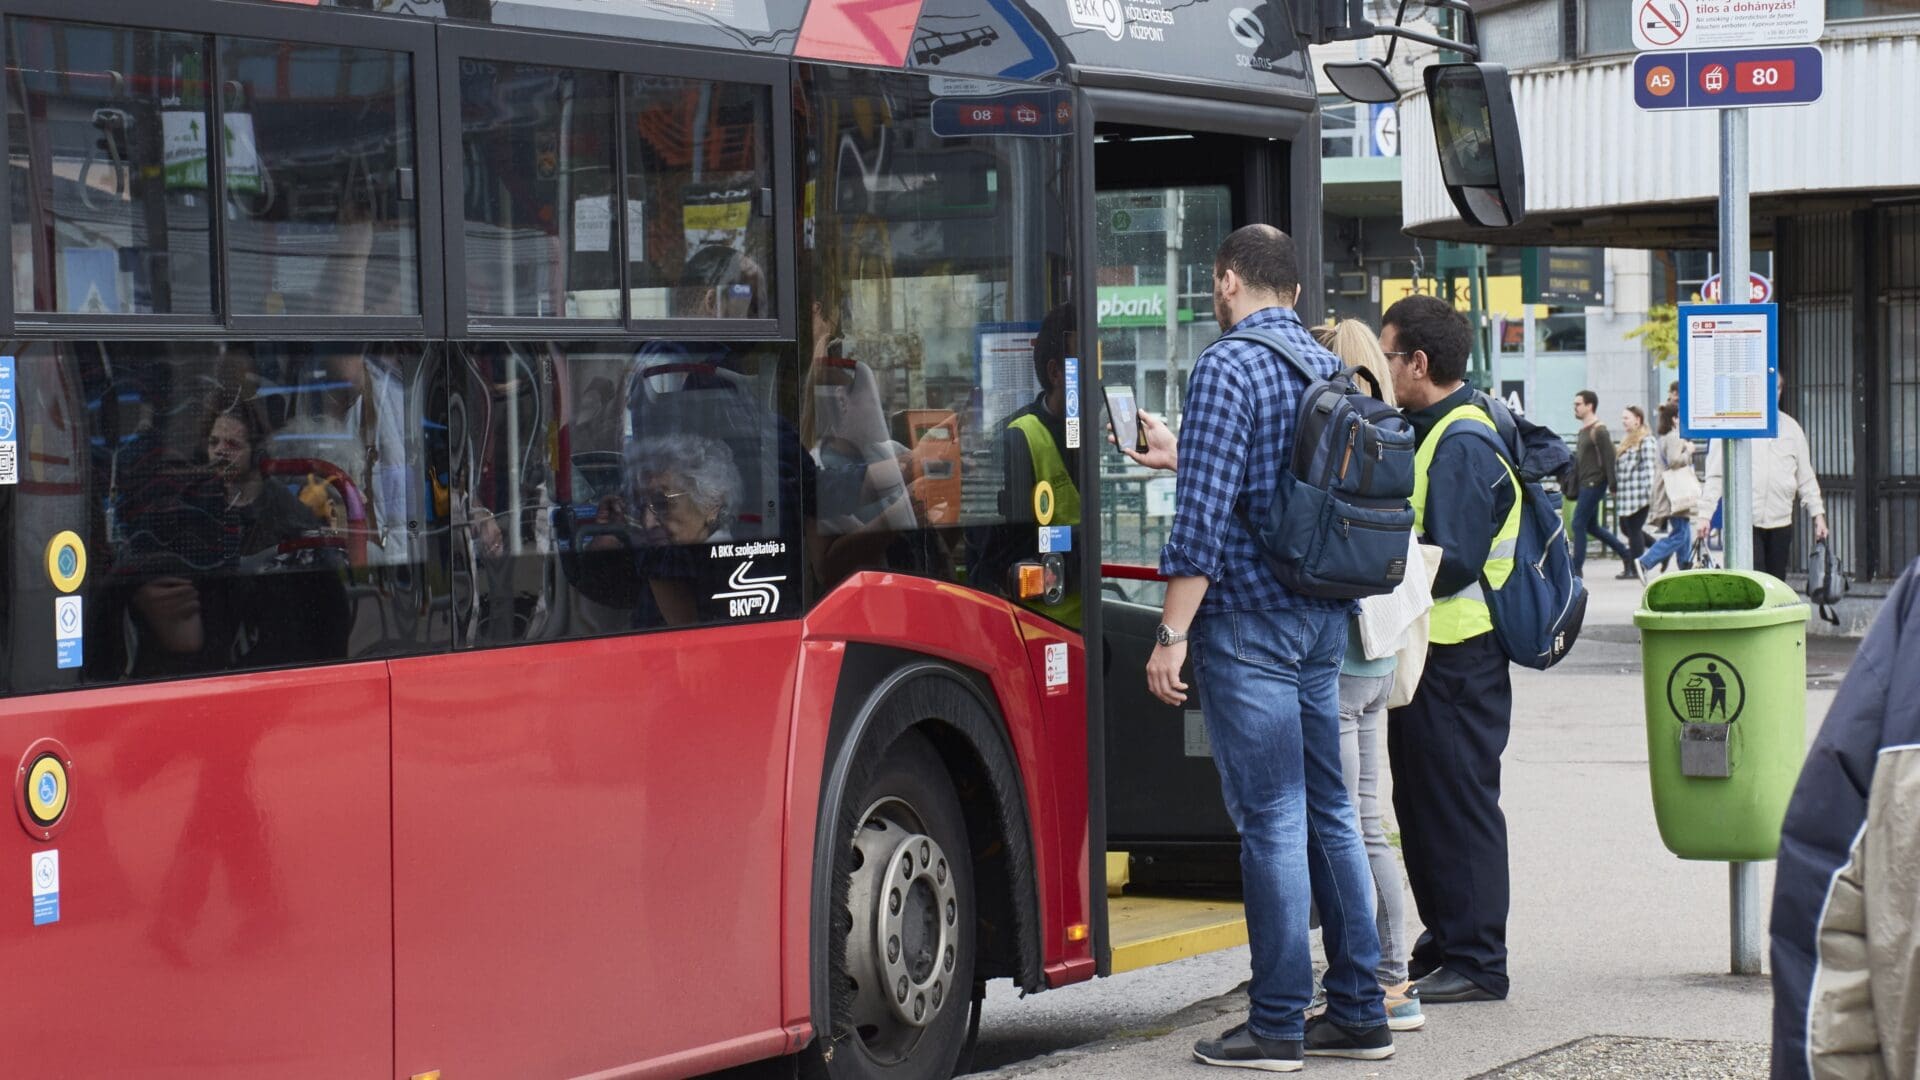 Passengers validating their mobile tickets before boarding a trolley bus in Budapest on 21 October 2023.